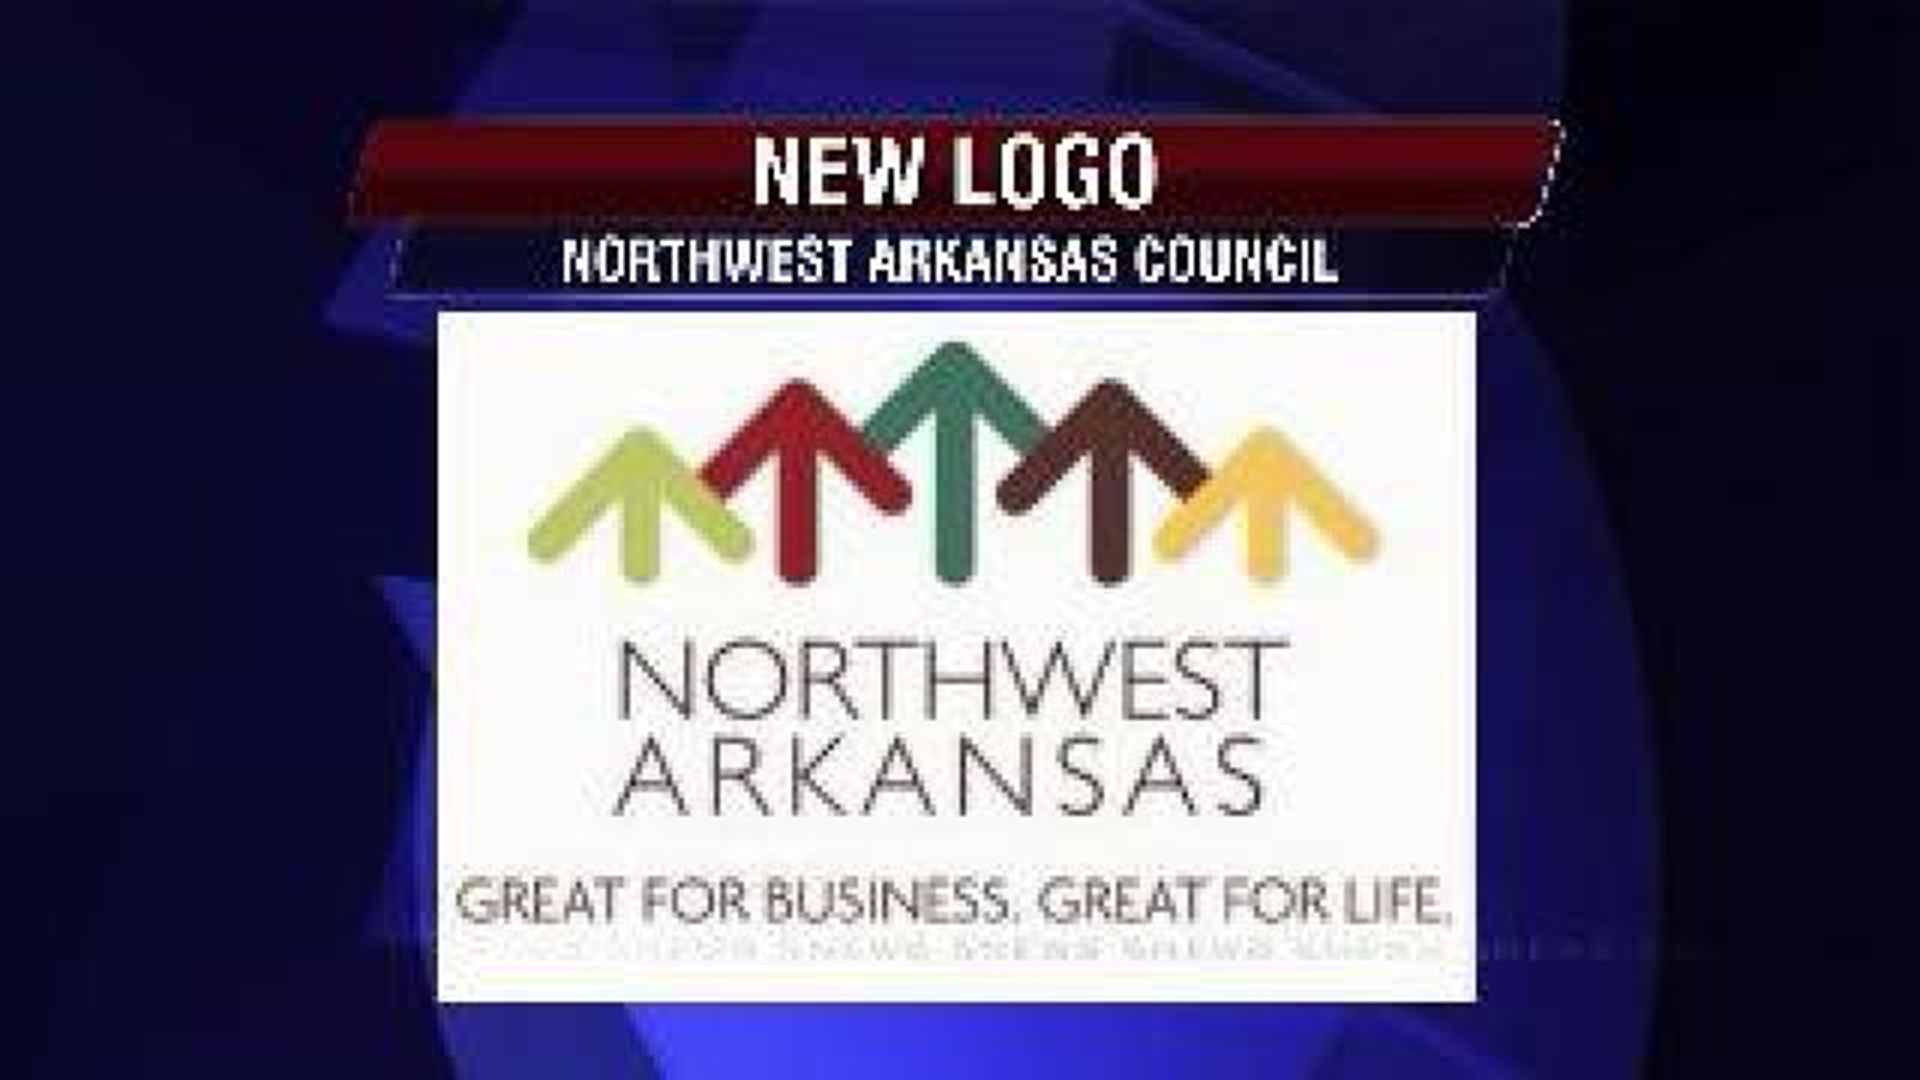 New External Marketing Campaign Hopes to Draw Businesses to Region